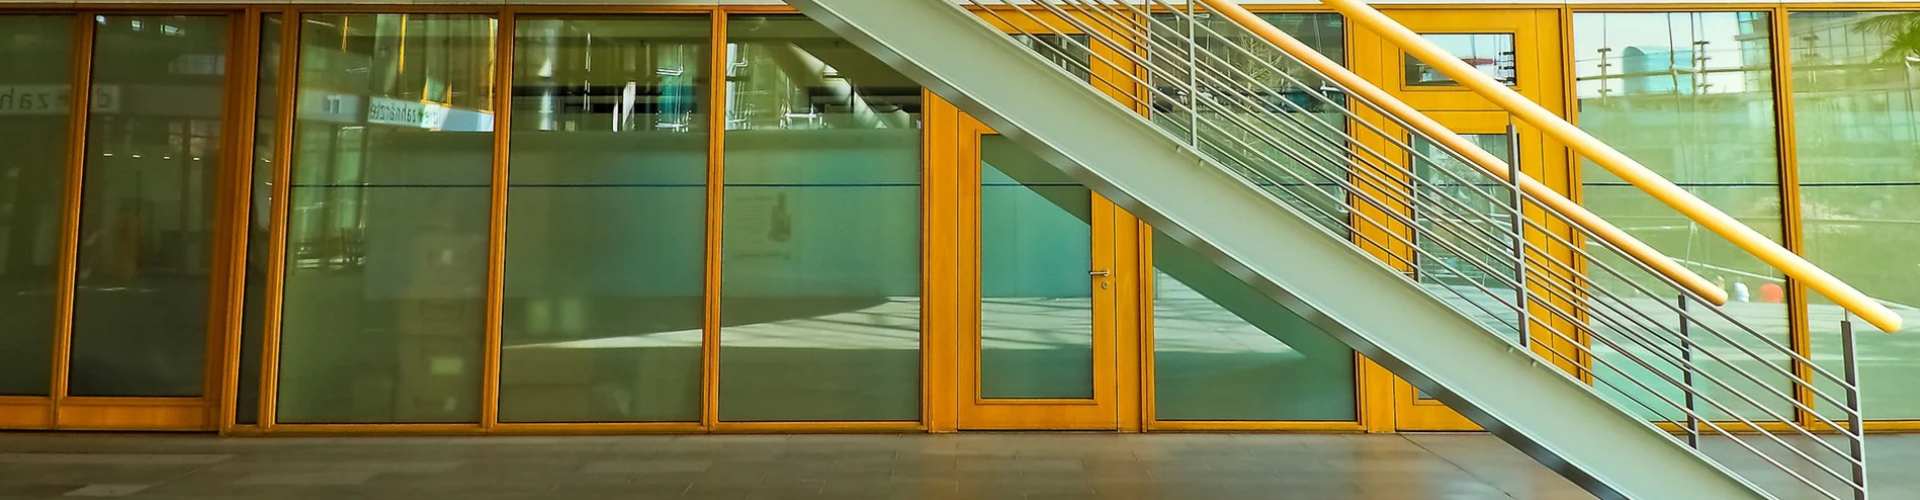 Modern interior view of a building featuring a glass façade and a sleek staircase with yellow handrails.